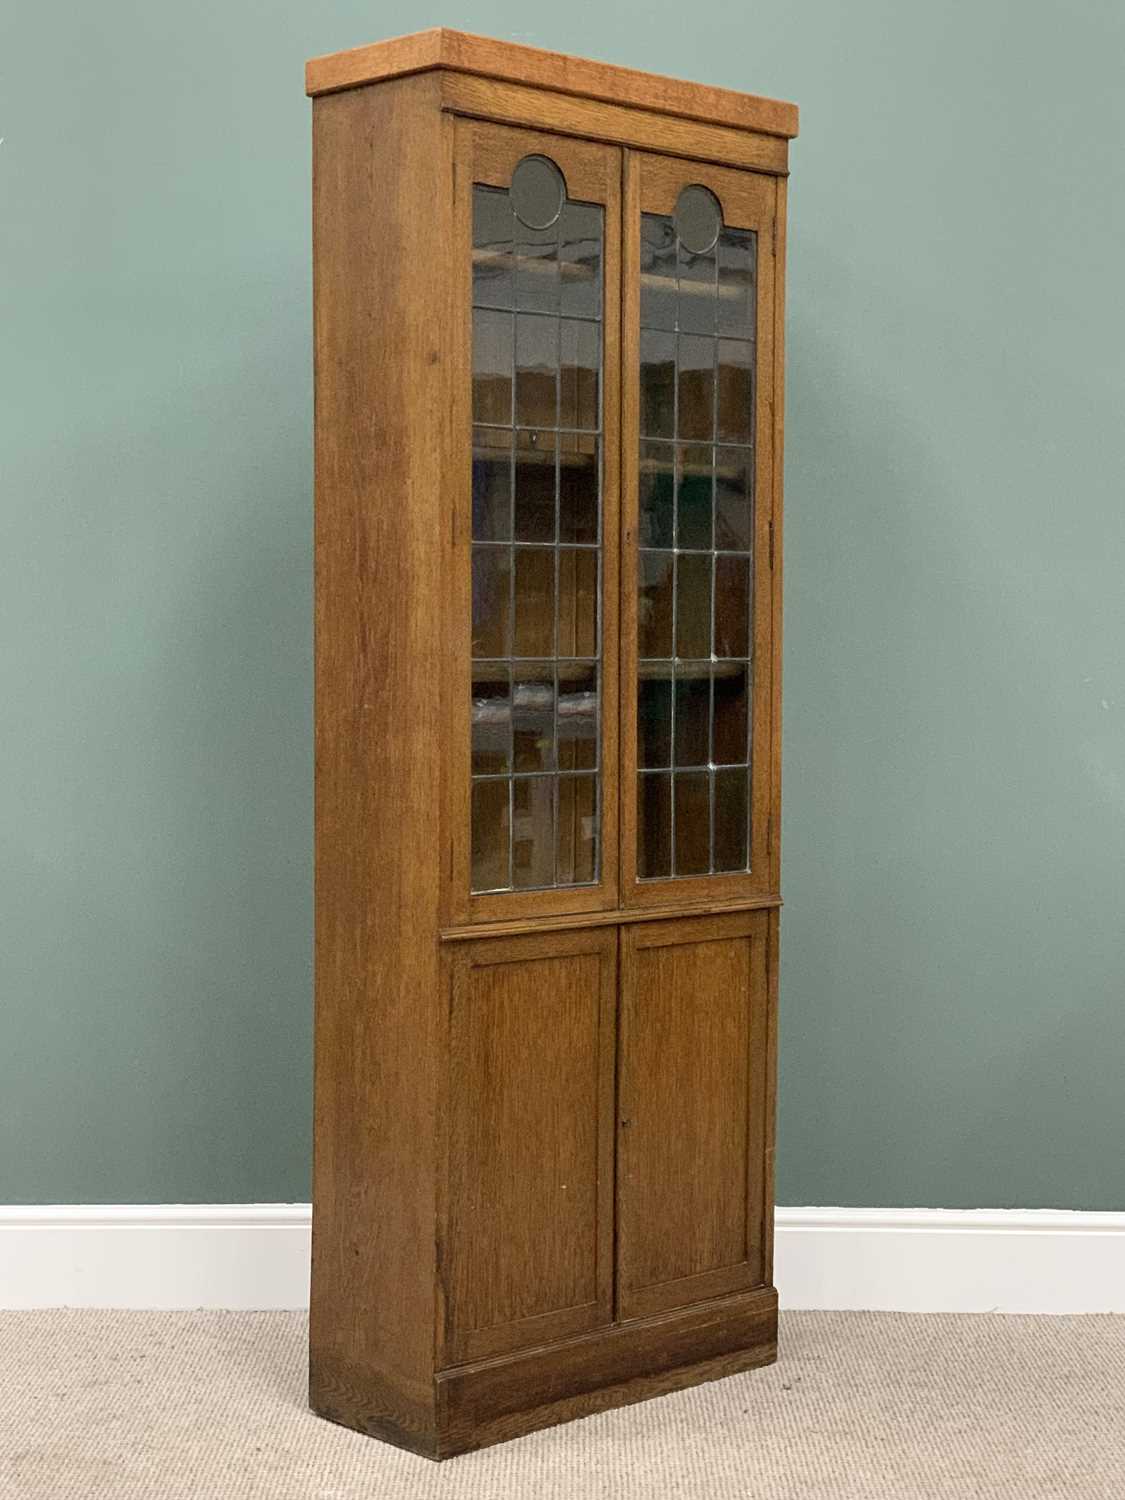 VINTAGE OAK GLAZED TOP BOOKCASE CUPBOARD - slim proportions with leaded glazed upper doors and - Image 3 of 4